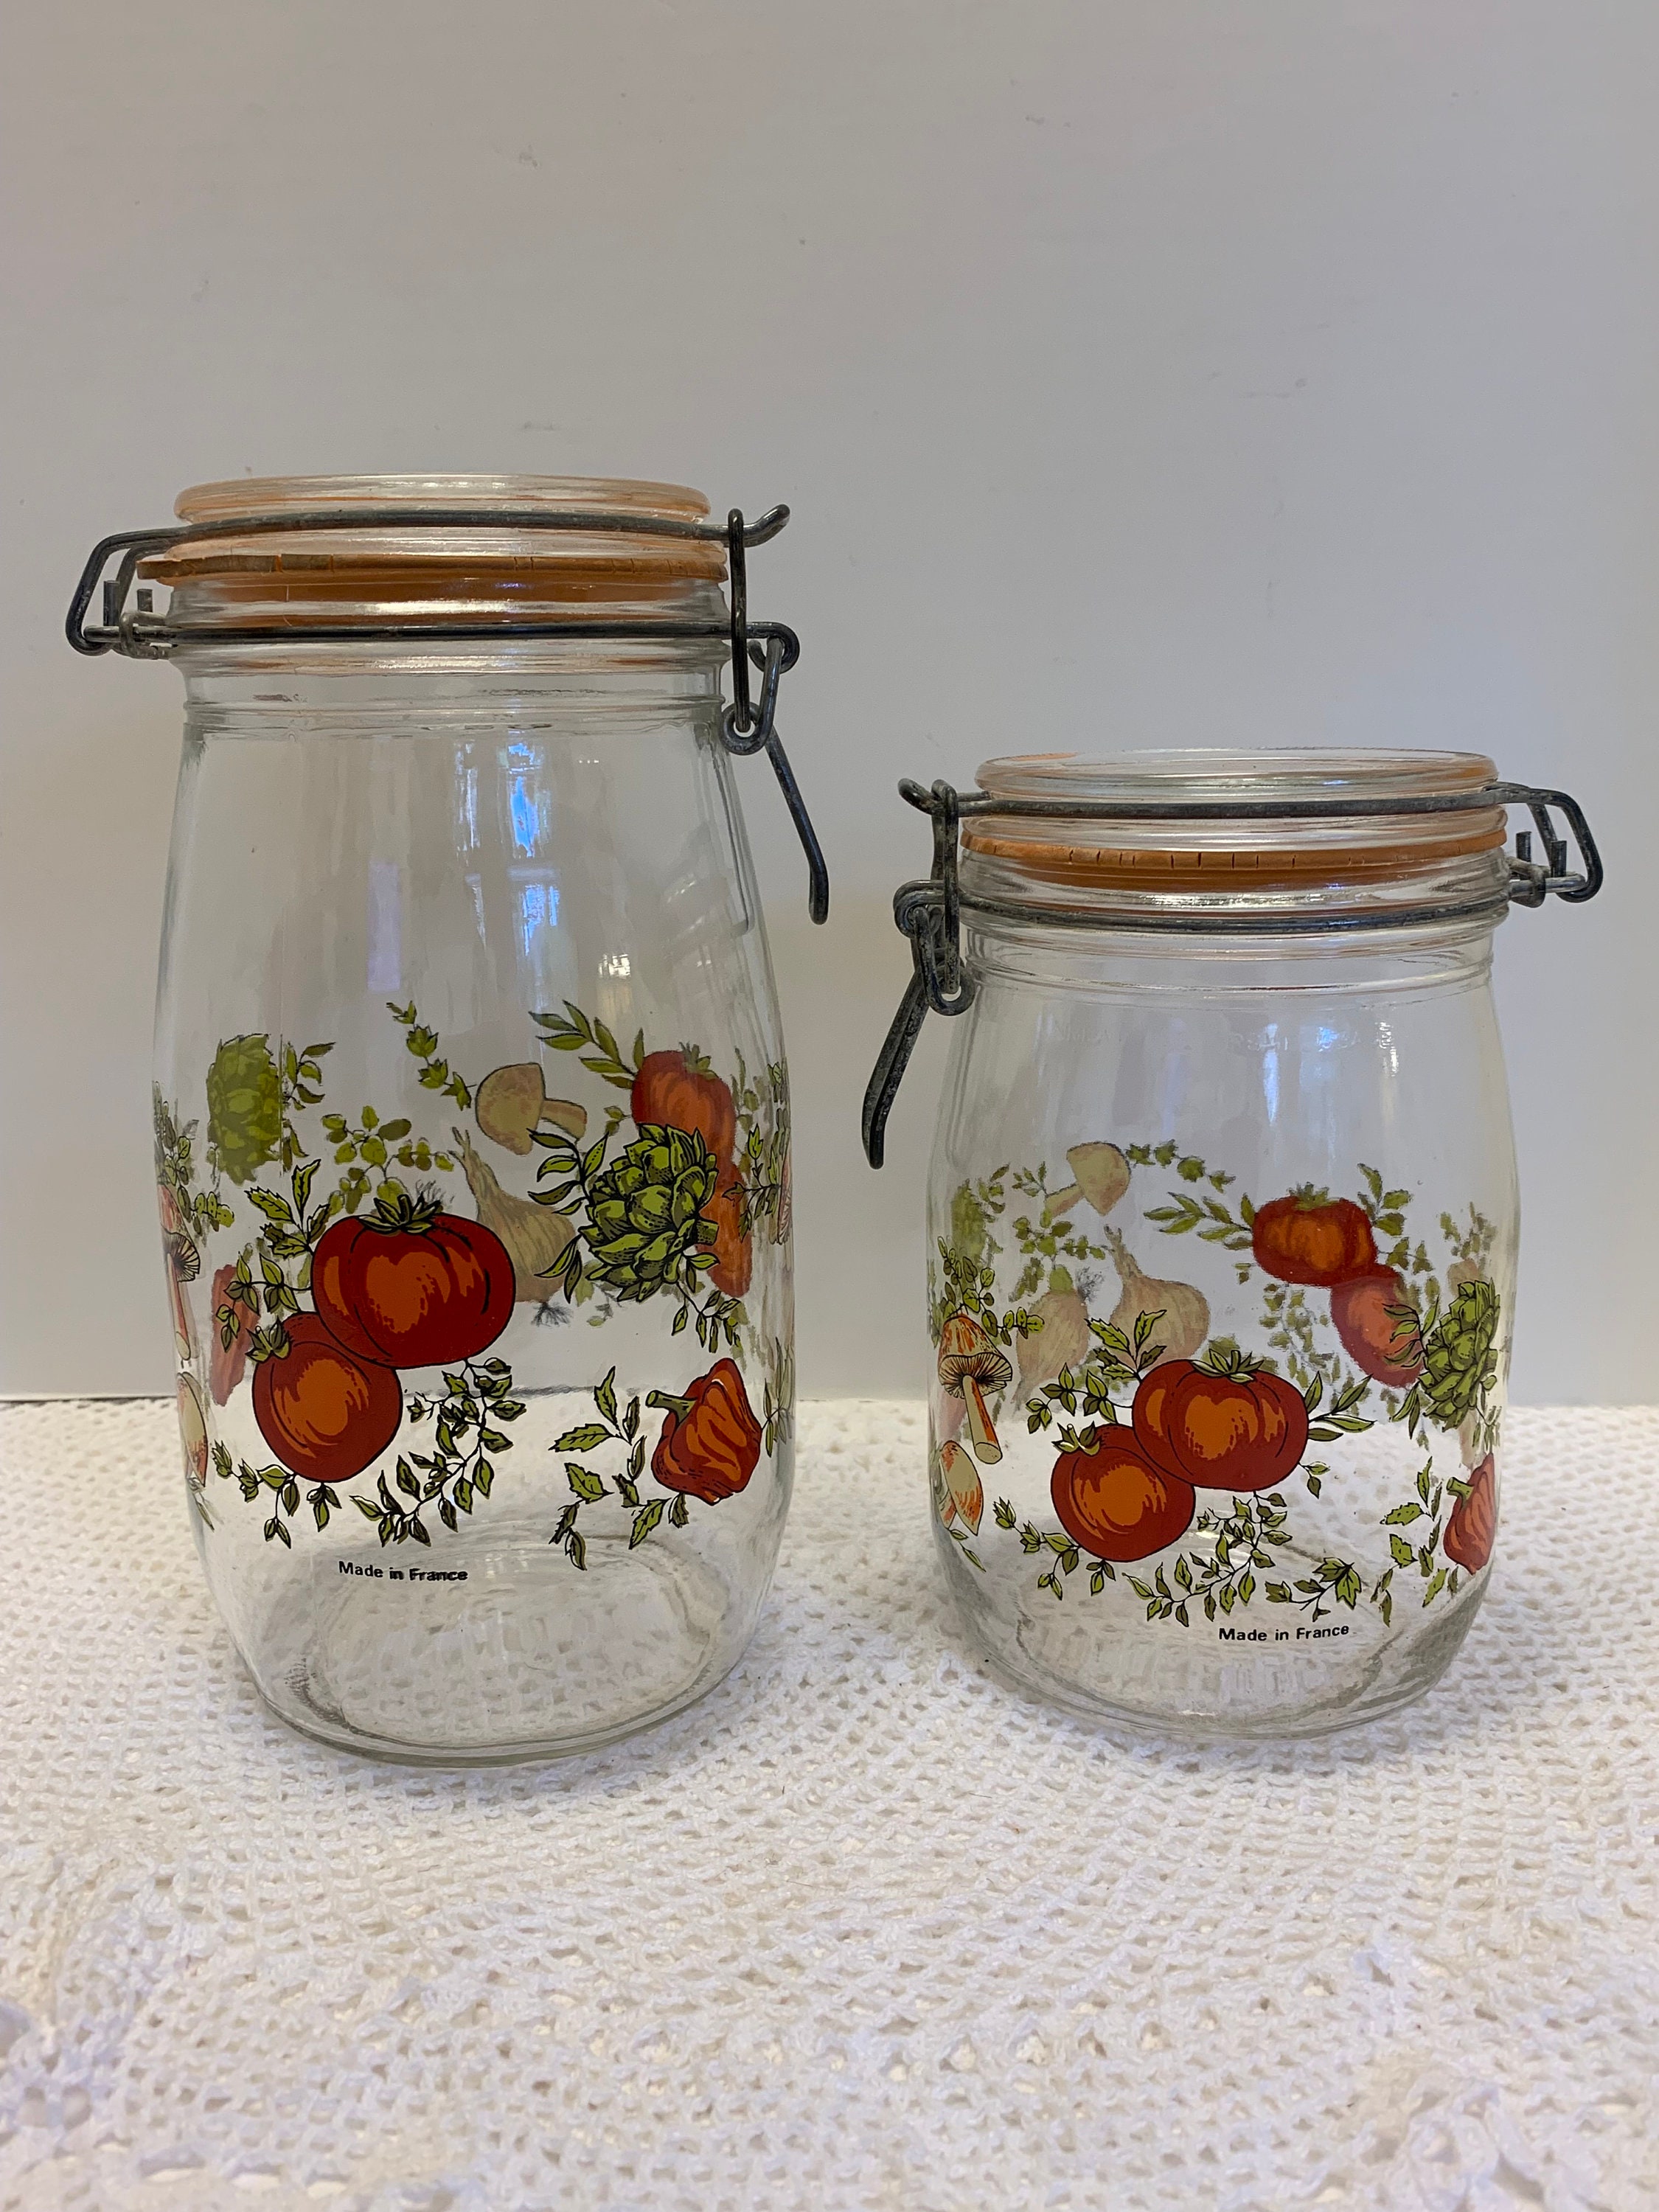 FORHVIPS 34 Oz/2 Pcs Empty Spice Jars Glass with Airtight Lid,Vintage Wide Mouth Mason Jars Sets for Food Storage containers,Sugar, Flour, Candy, Tea